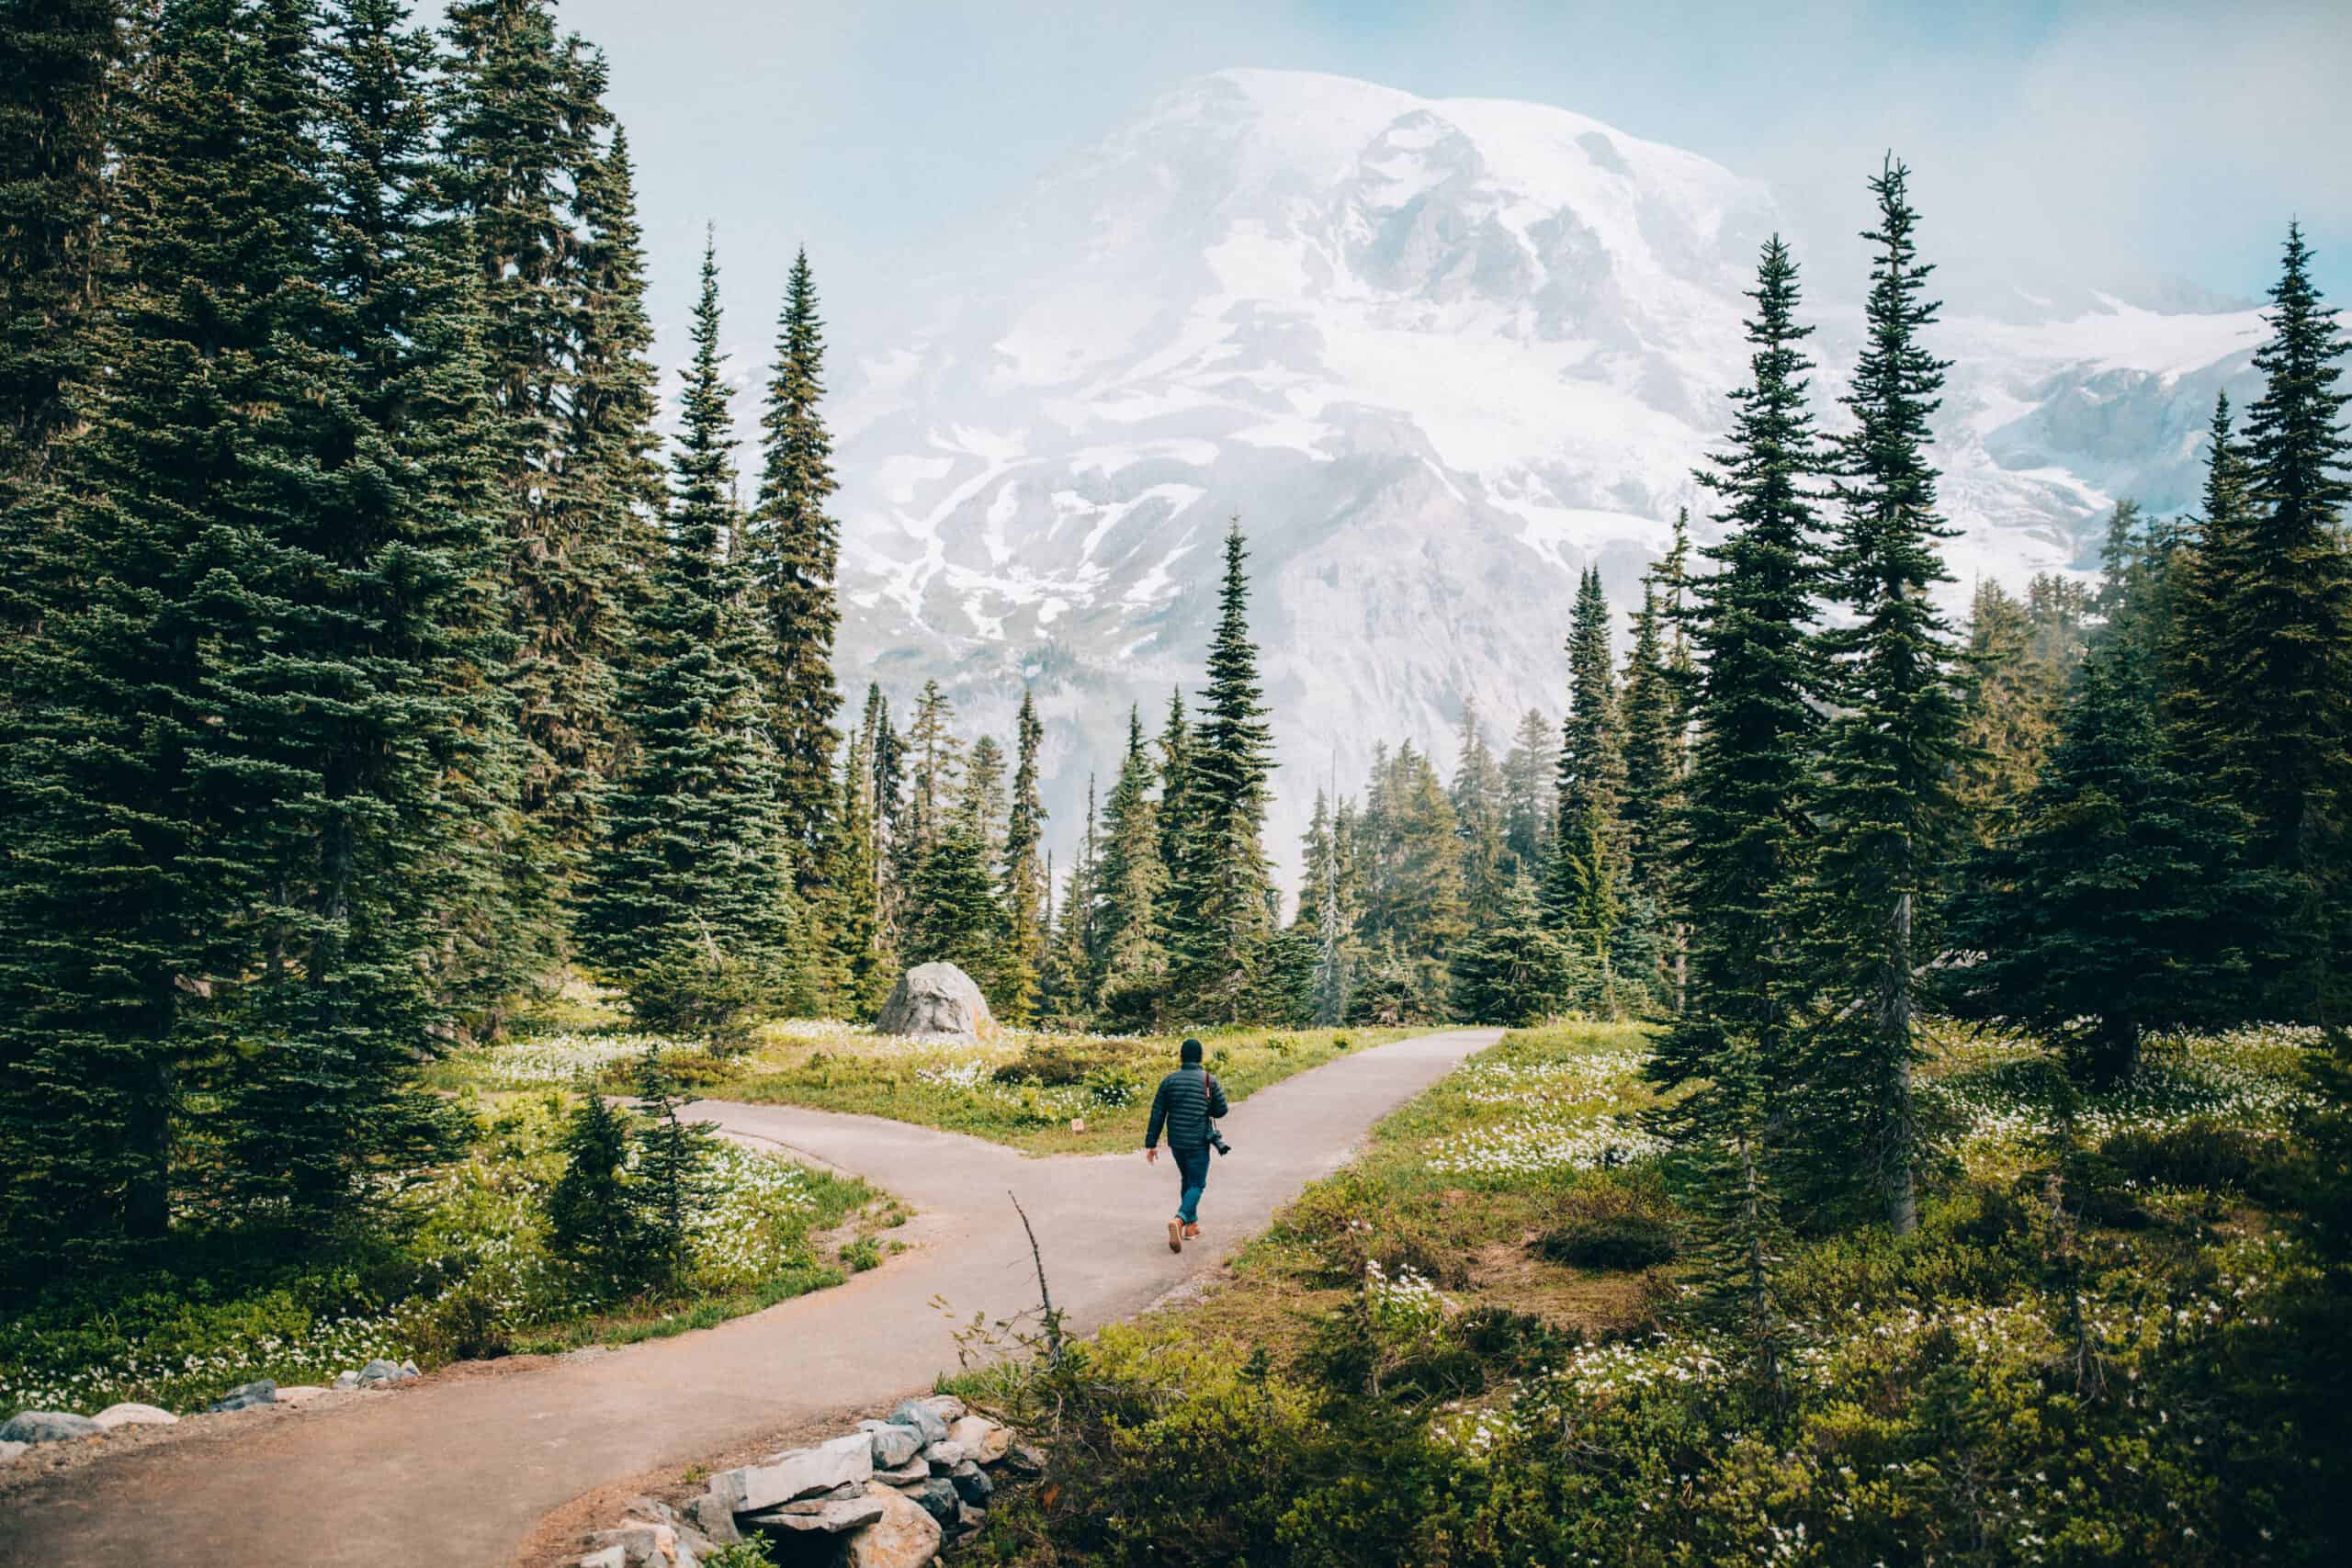 Things to do in Mount Rainier National Park